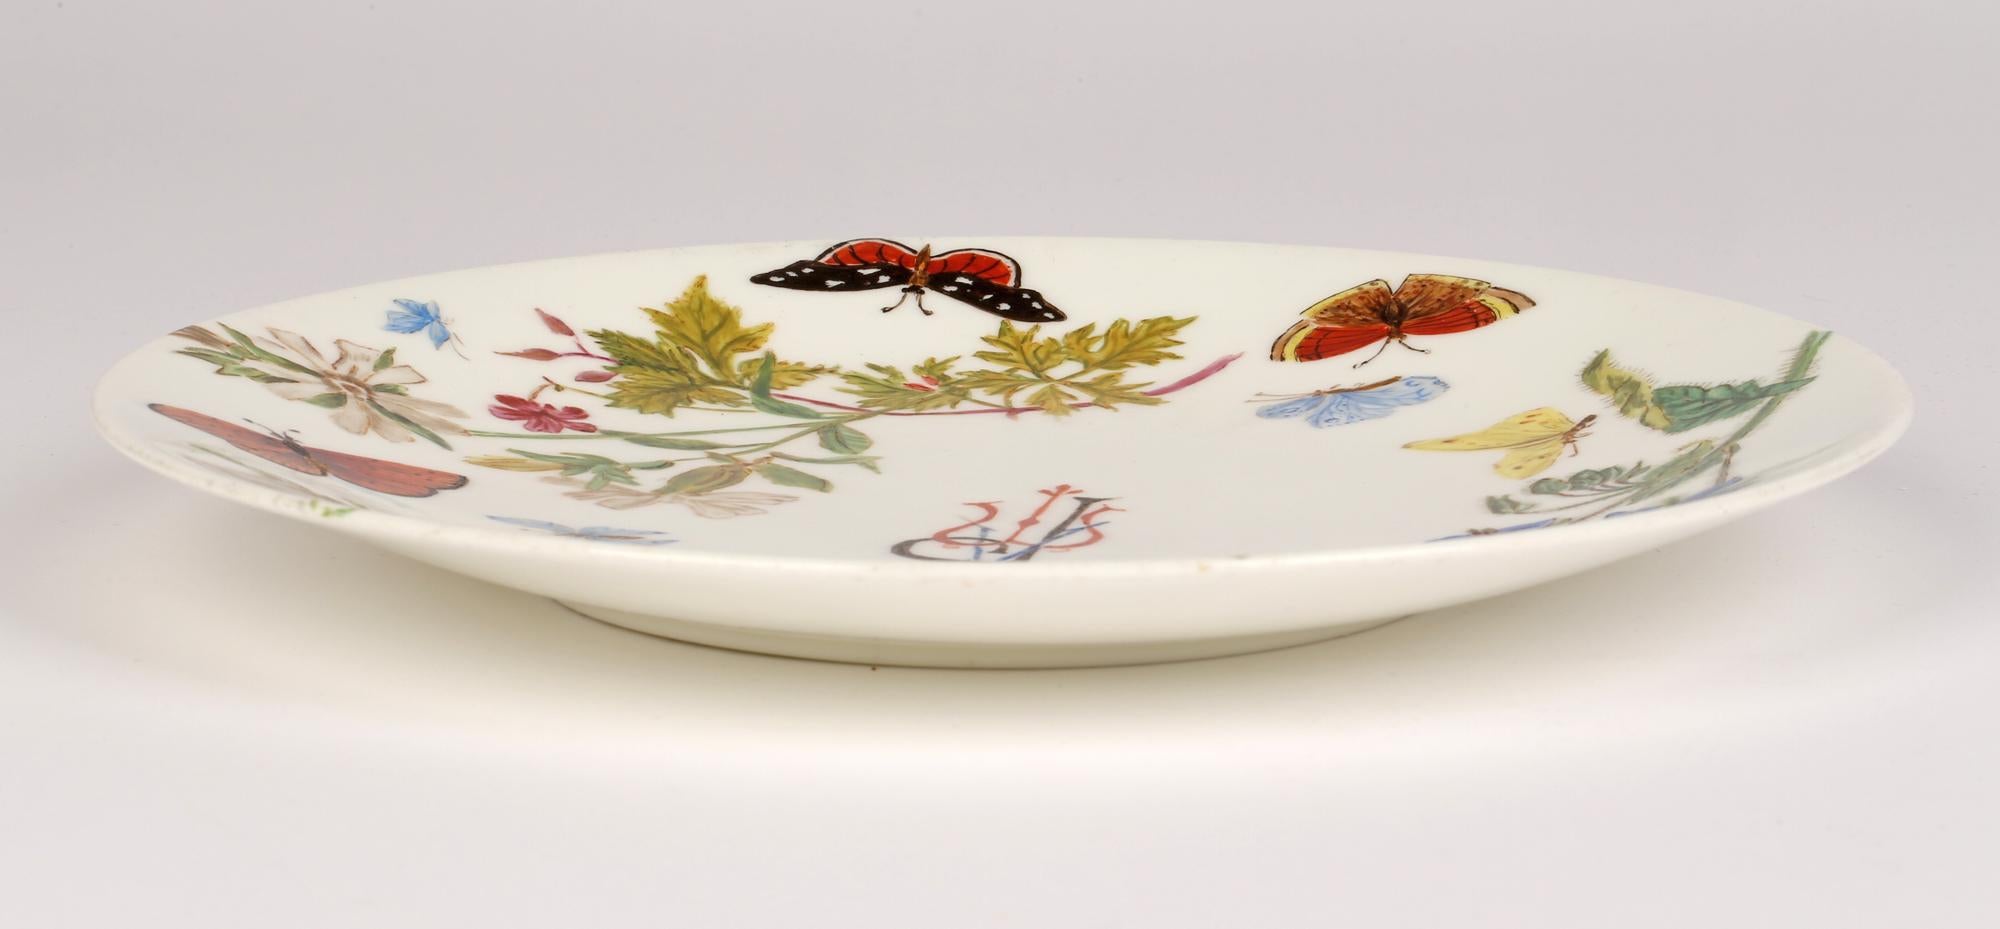 An unusual and stylish Aesthetic Movement Minton porcelain cabinet plate hand painted with flowers and butterflies with initials APM and dating from 1890. This finely made plate is of simple round form with a slightly raised edge and is very finely